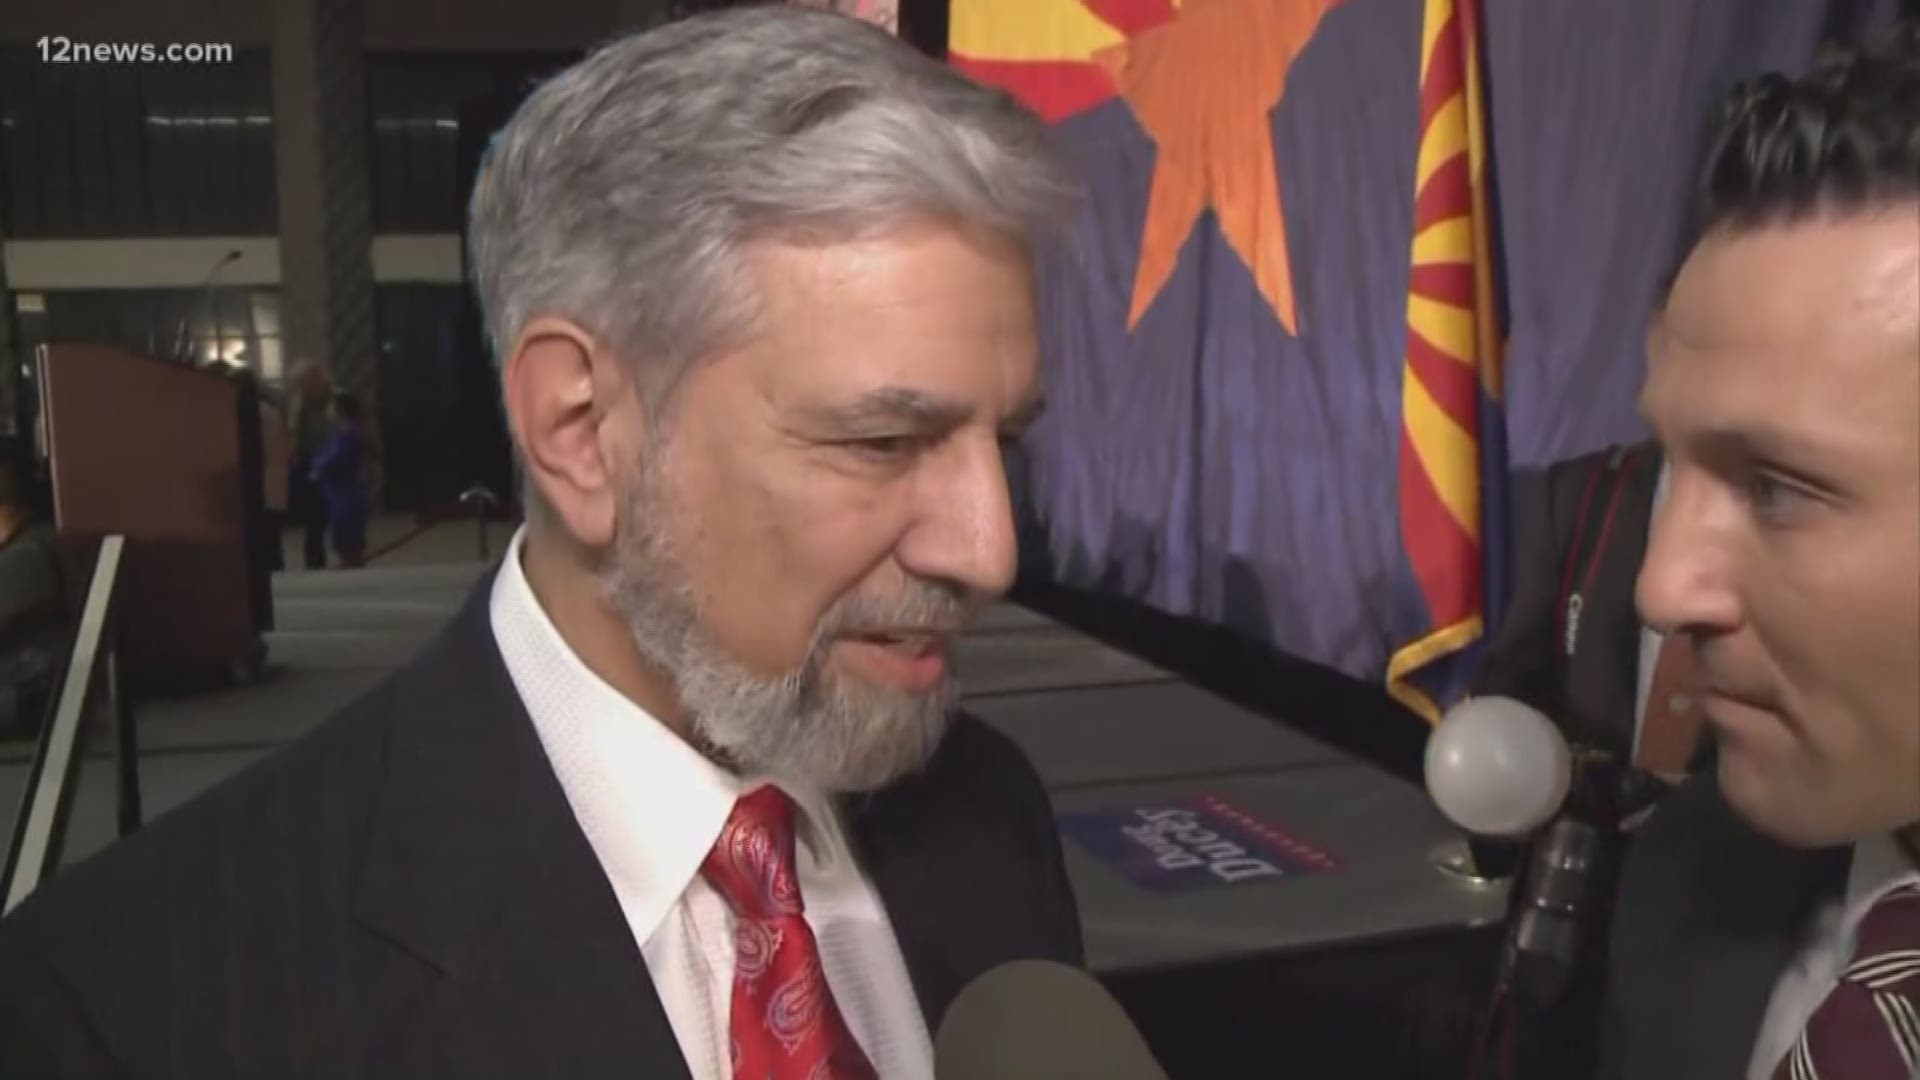 Steve Gaynor was a relative unknown before he ran for AZ Secretary of State. 12 News talks to him about his vision for Arizona.